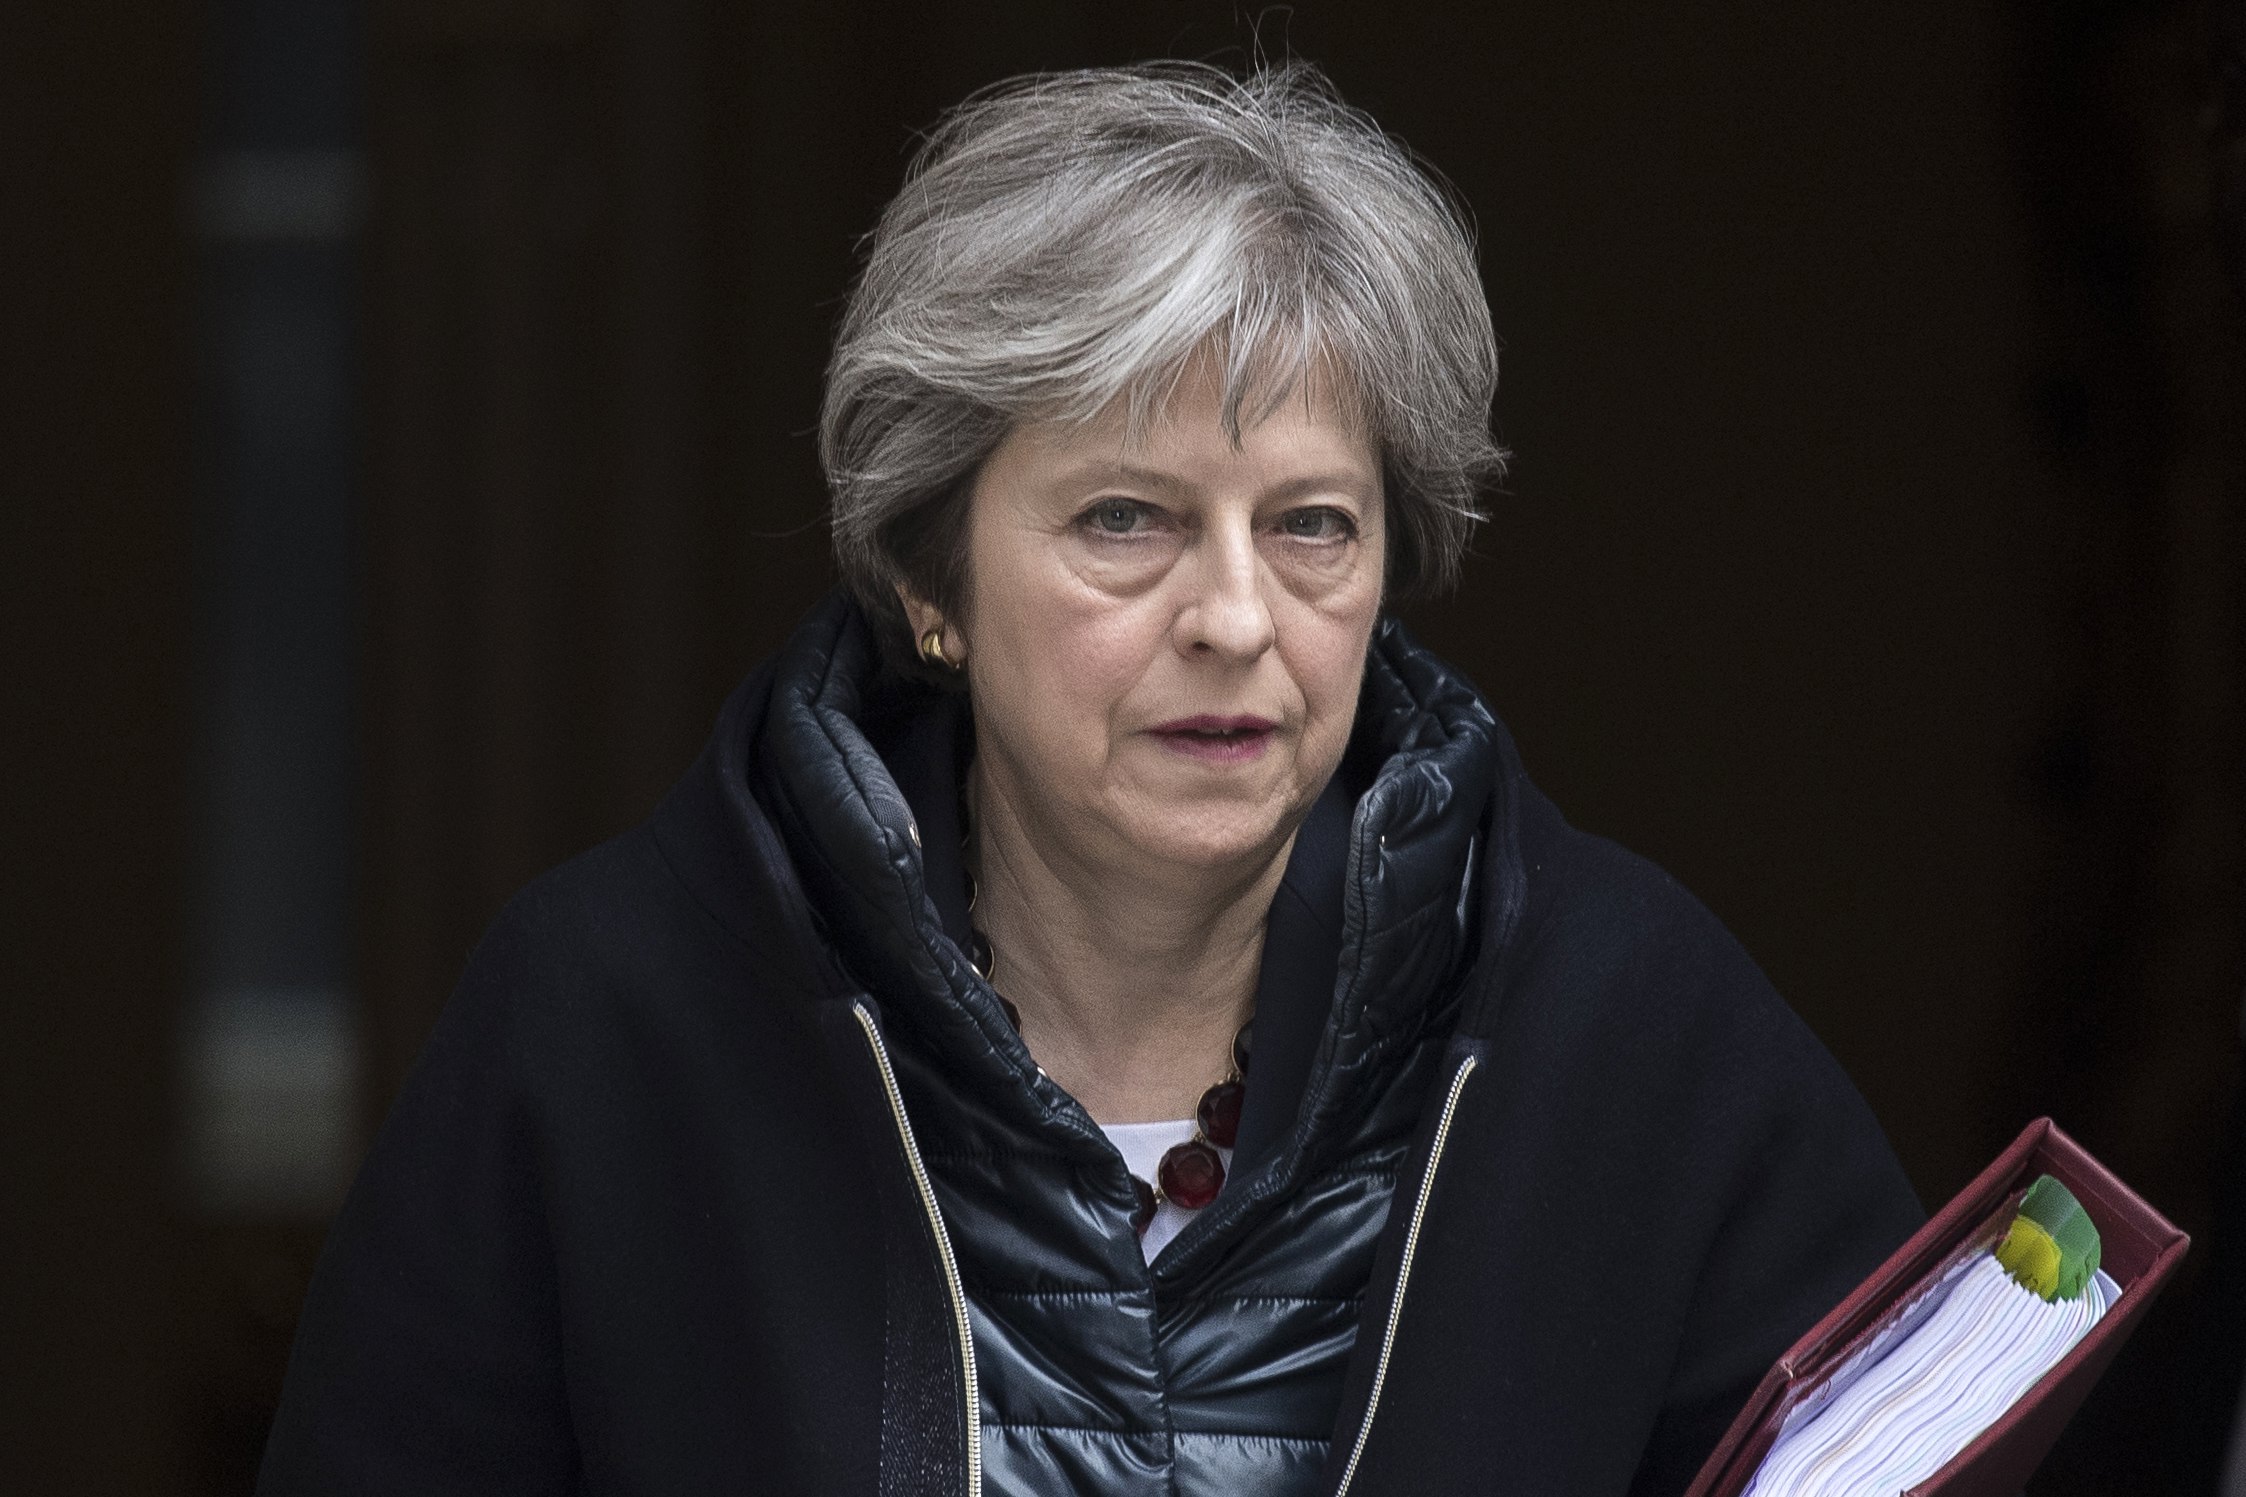 2018-03-14 12:00:37 epa06603130 Britain's Prime Minister Theresa May leaves No. 10 Downing Street to attend the Prime Minister's Questions in the Houses of Commons, in London, Britain, 14 March 2018. Mrs May is expected to update the Commons on Britain's reaction to the alleged involvement of Russia in the poisoning of ex-Russian spy Sergei Skripal and his daughter who were attacked with a nerve agent on 04 March 2018 in Salisbury. EPA/WILL OLIVER